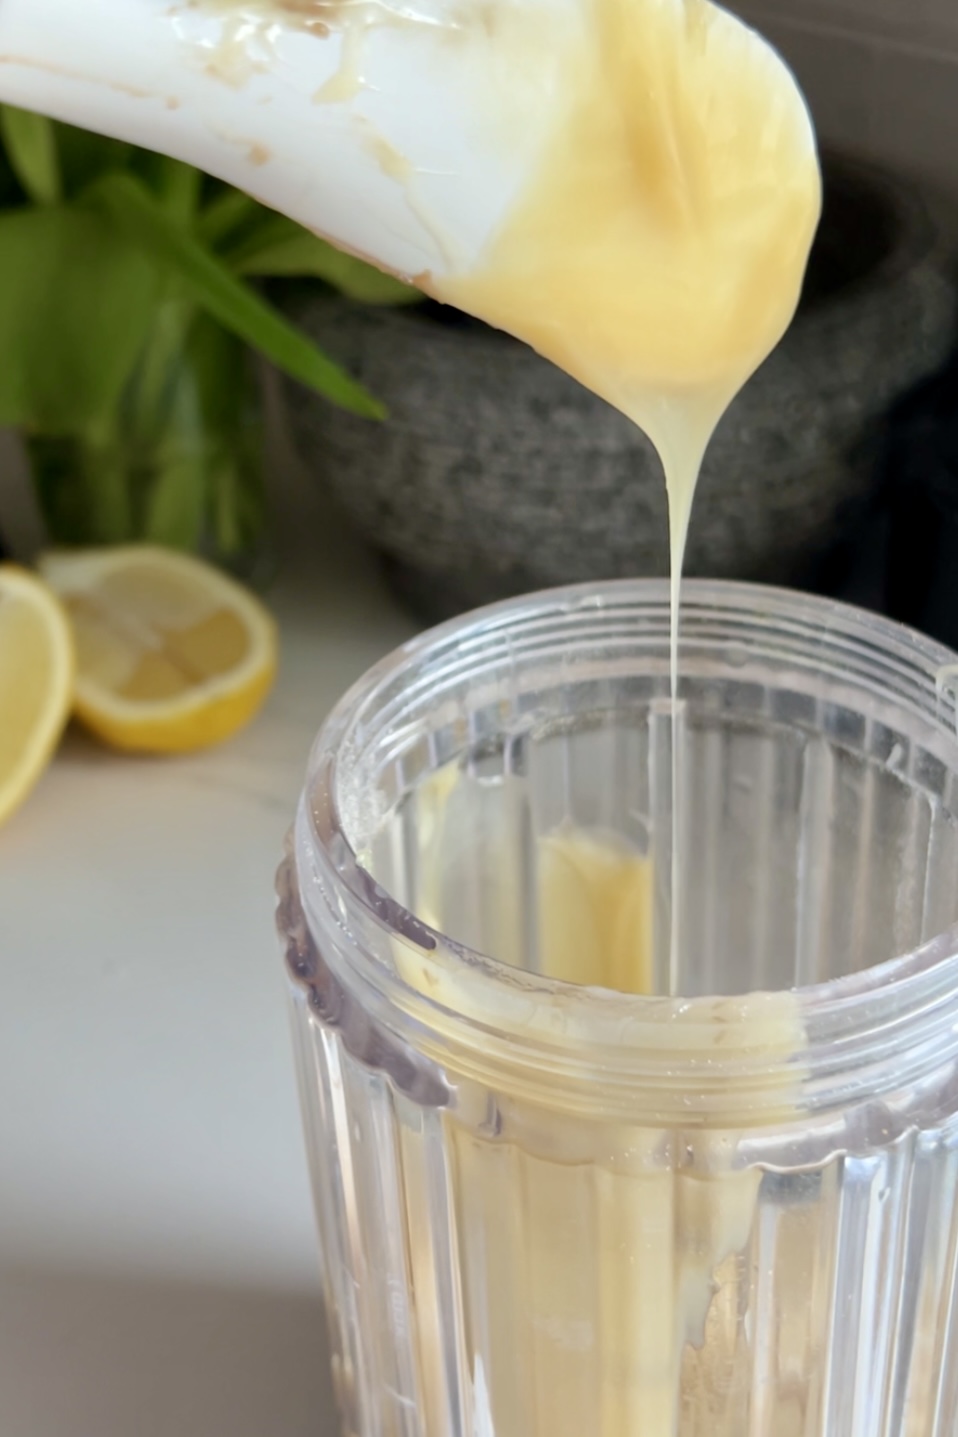 Condensed milk being poured from a white spoon into a clear glass, with a halved lemon and a stone mortar in the background on a kitchen counter for Lemon Pie Paletas recipe.